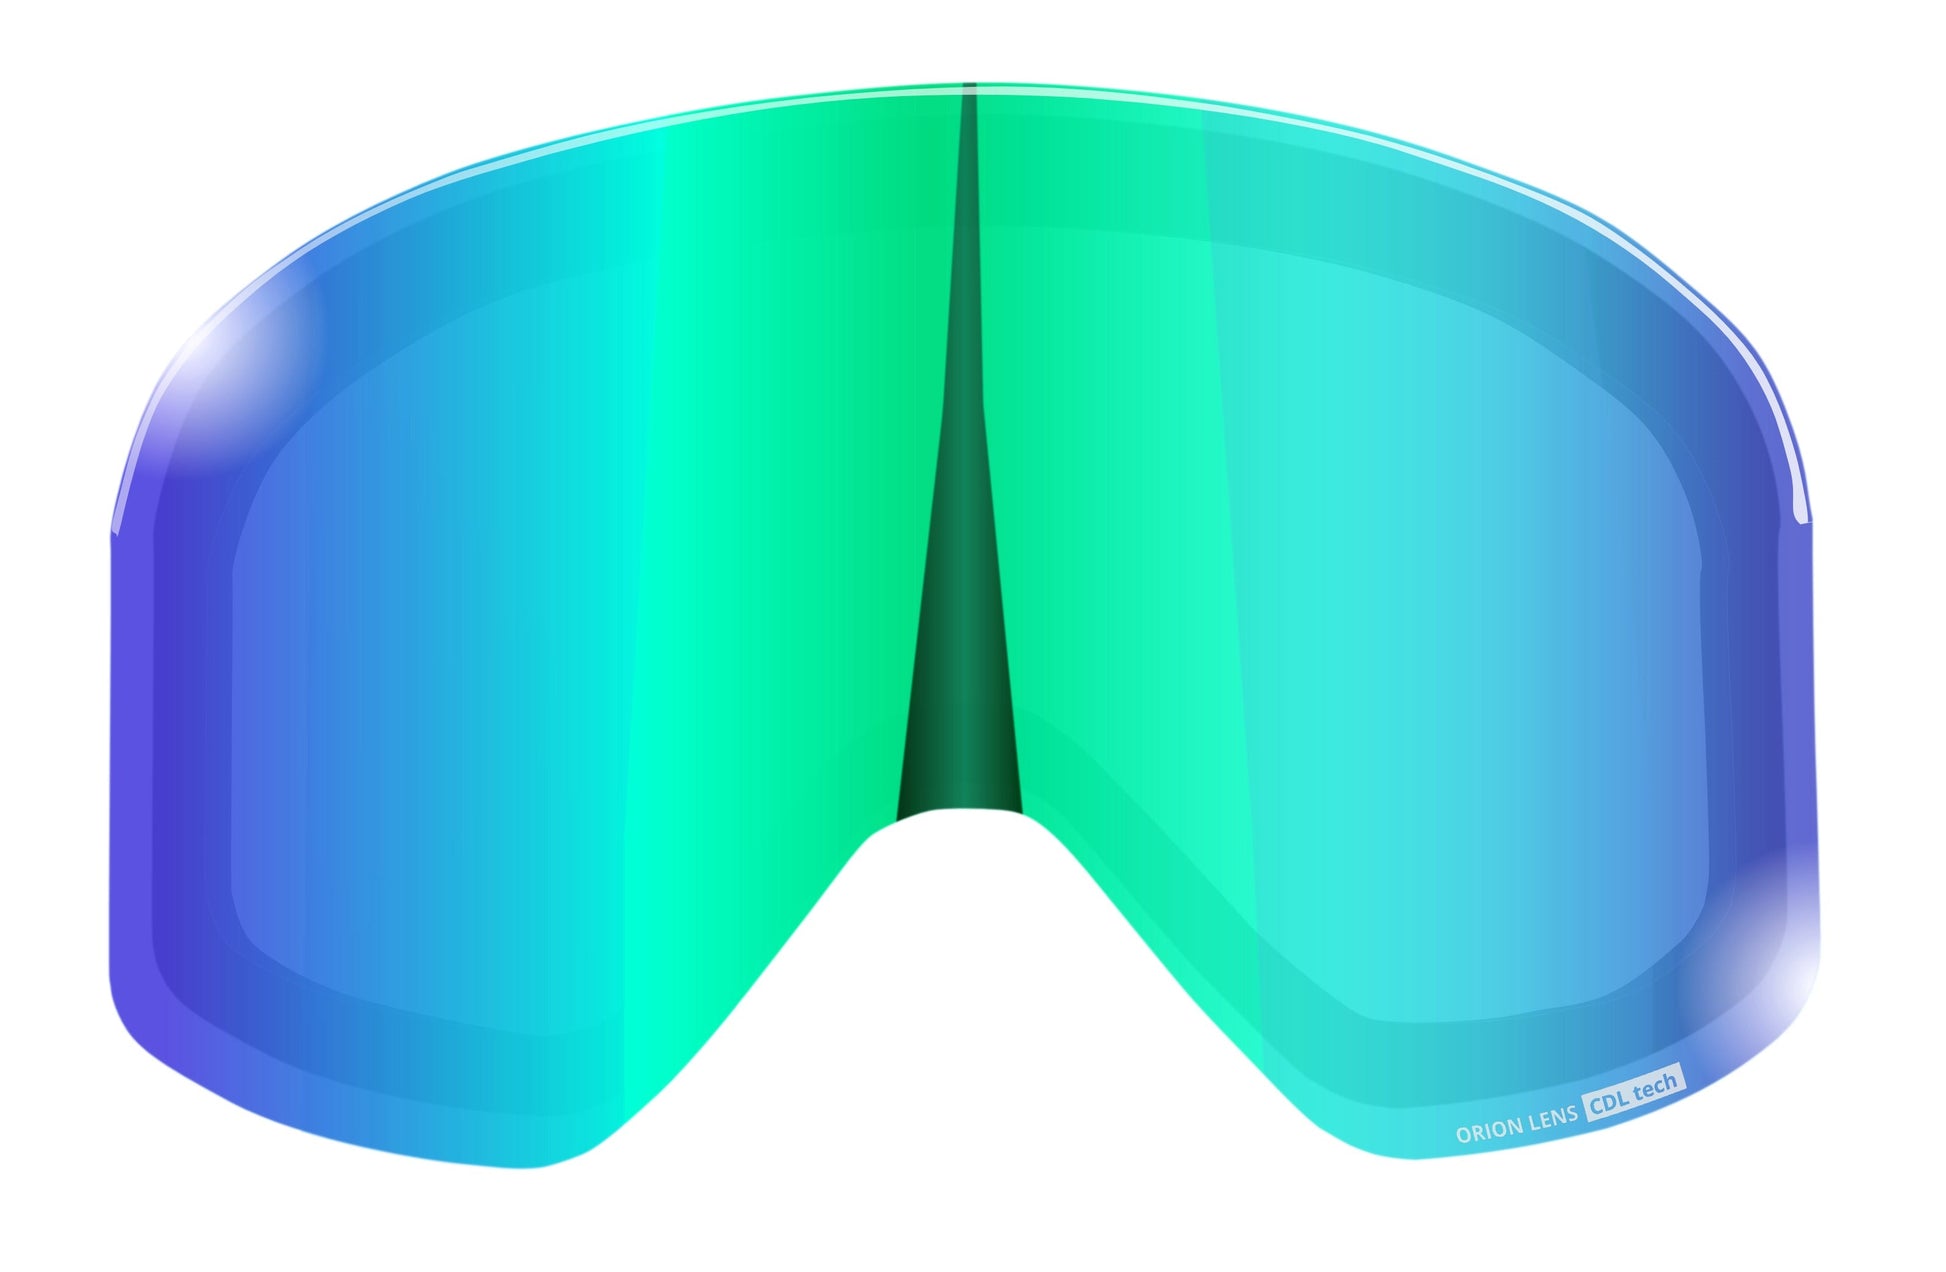 LENS ONLY - FULL REVO replacement lens for 6fiftyfive Orion ski goggles for men and women - VLT 22% - Forest green - 6fiftyfive